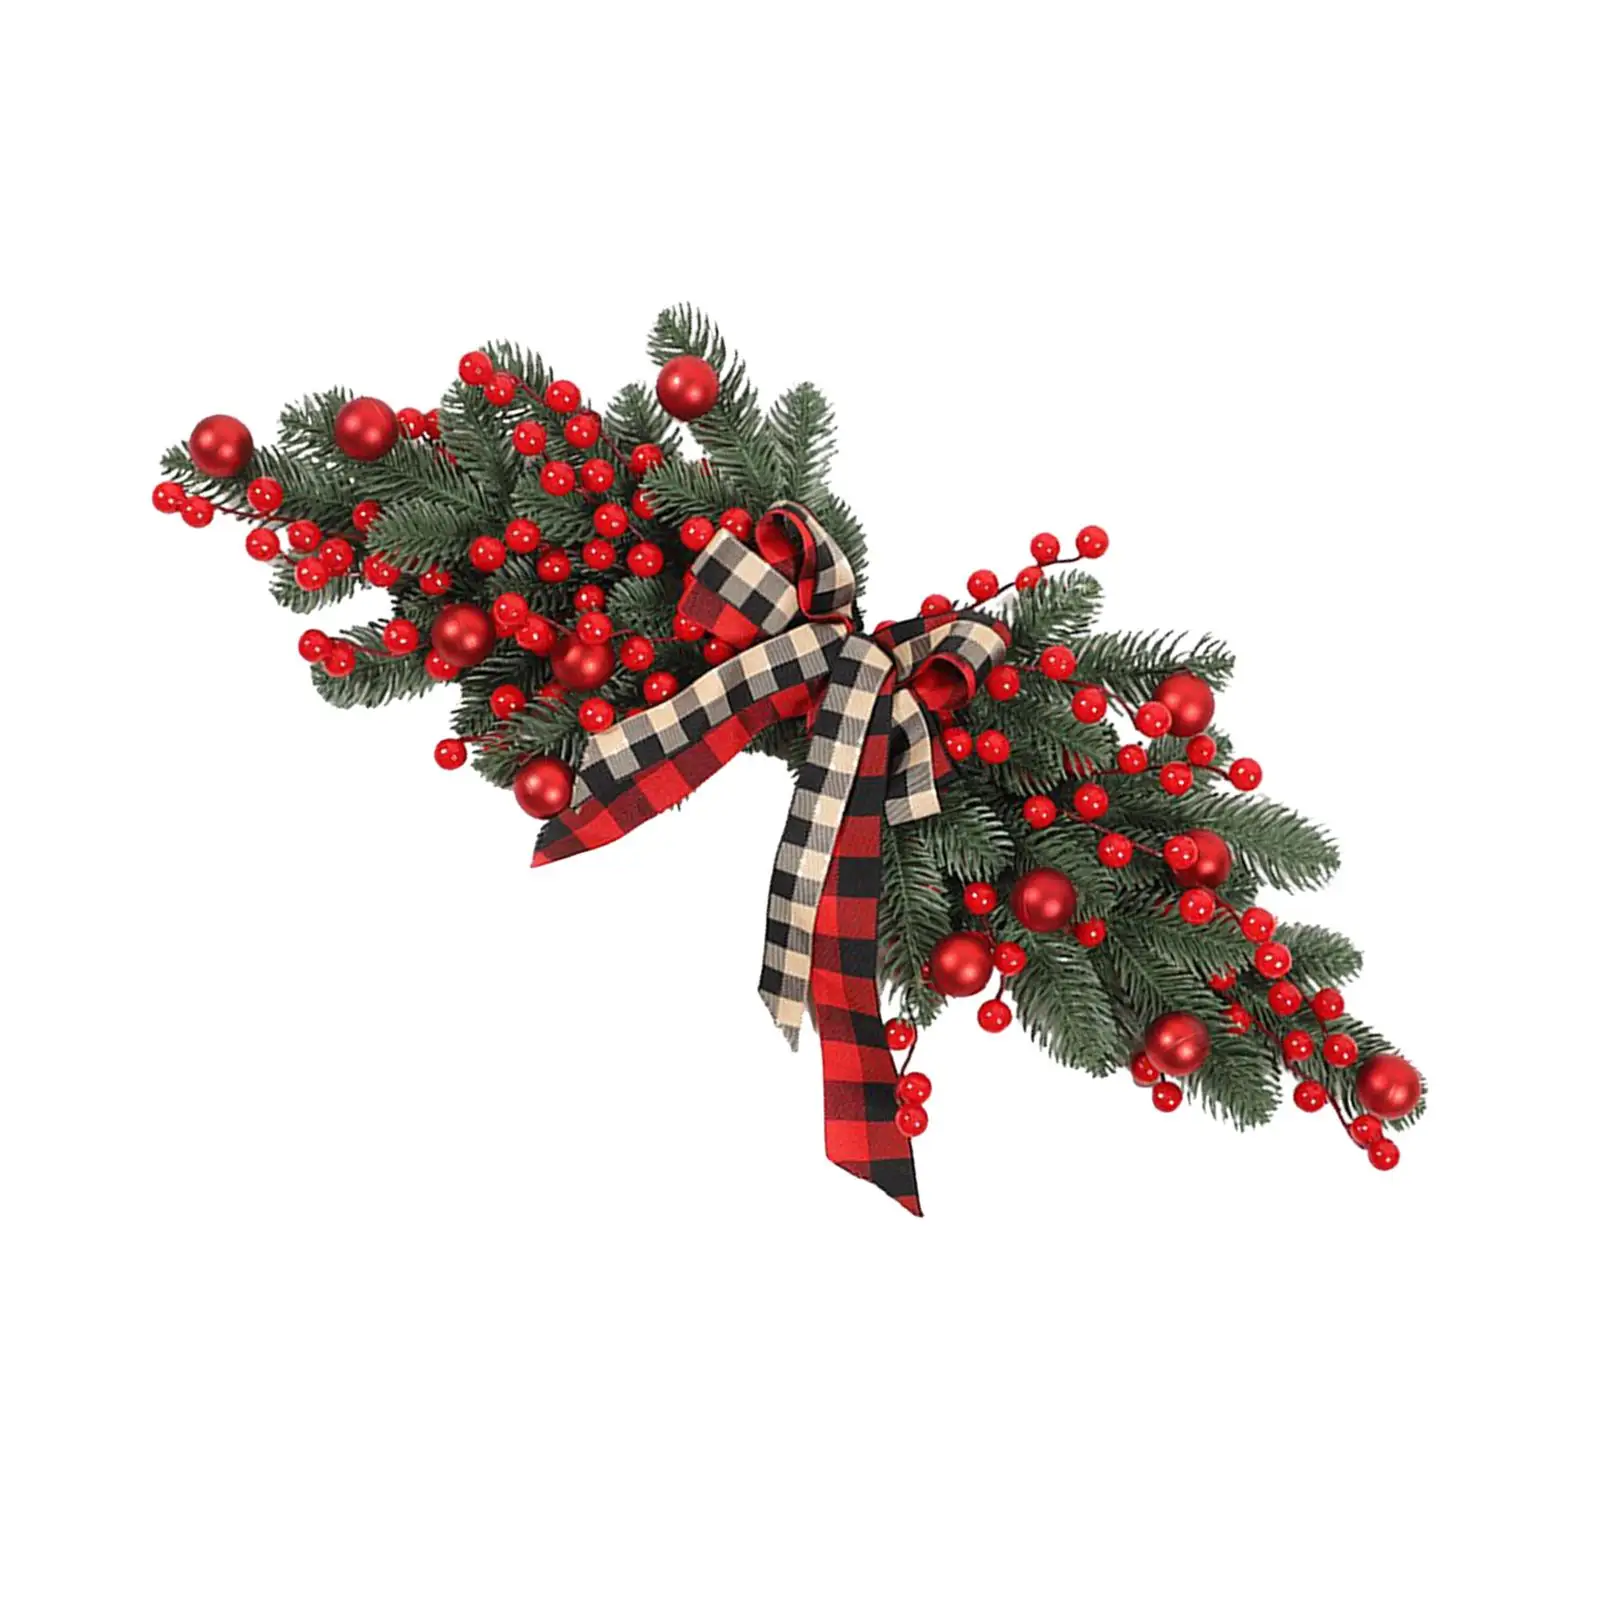 Christmas Wreath Artificial Red Berries Branch Wreath Wall Hanging DIY Xmas Garland for New Year Holiday Party Garden Xmas